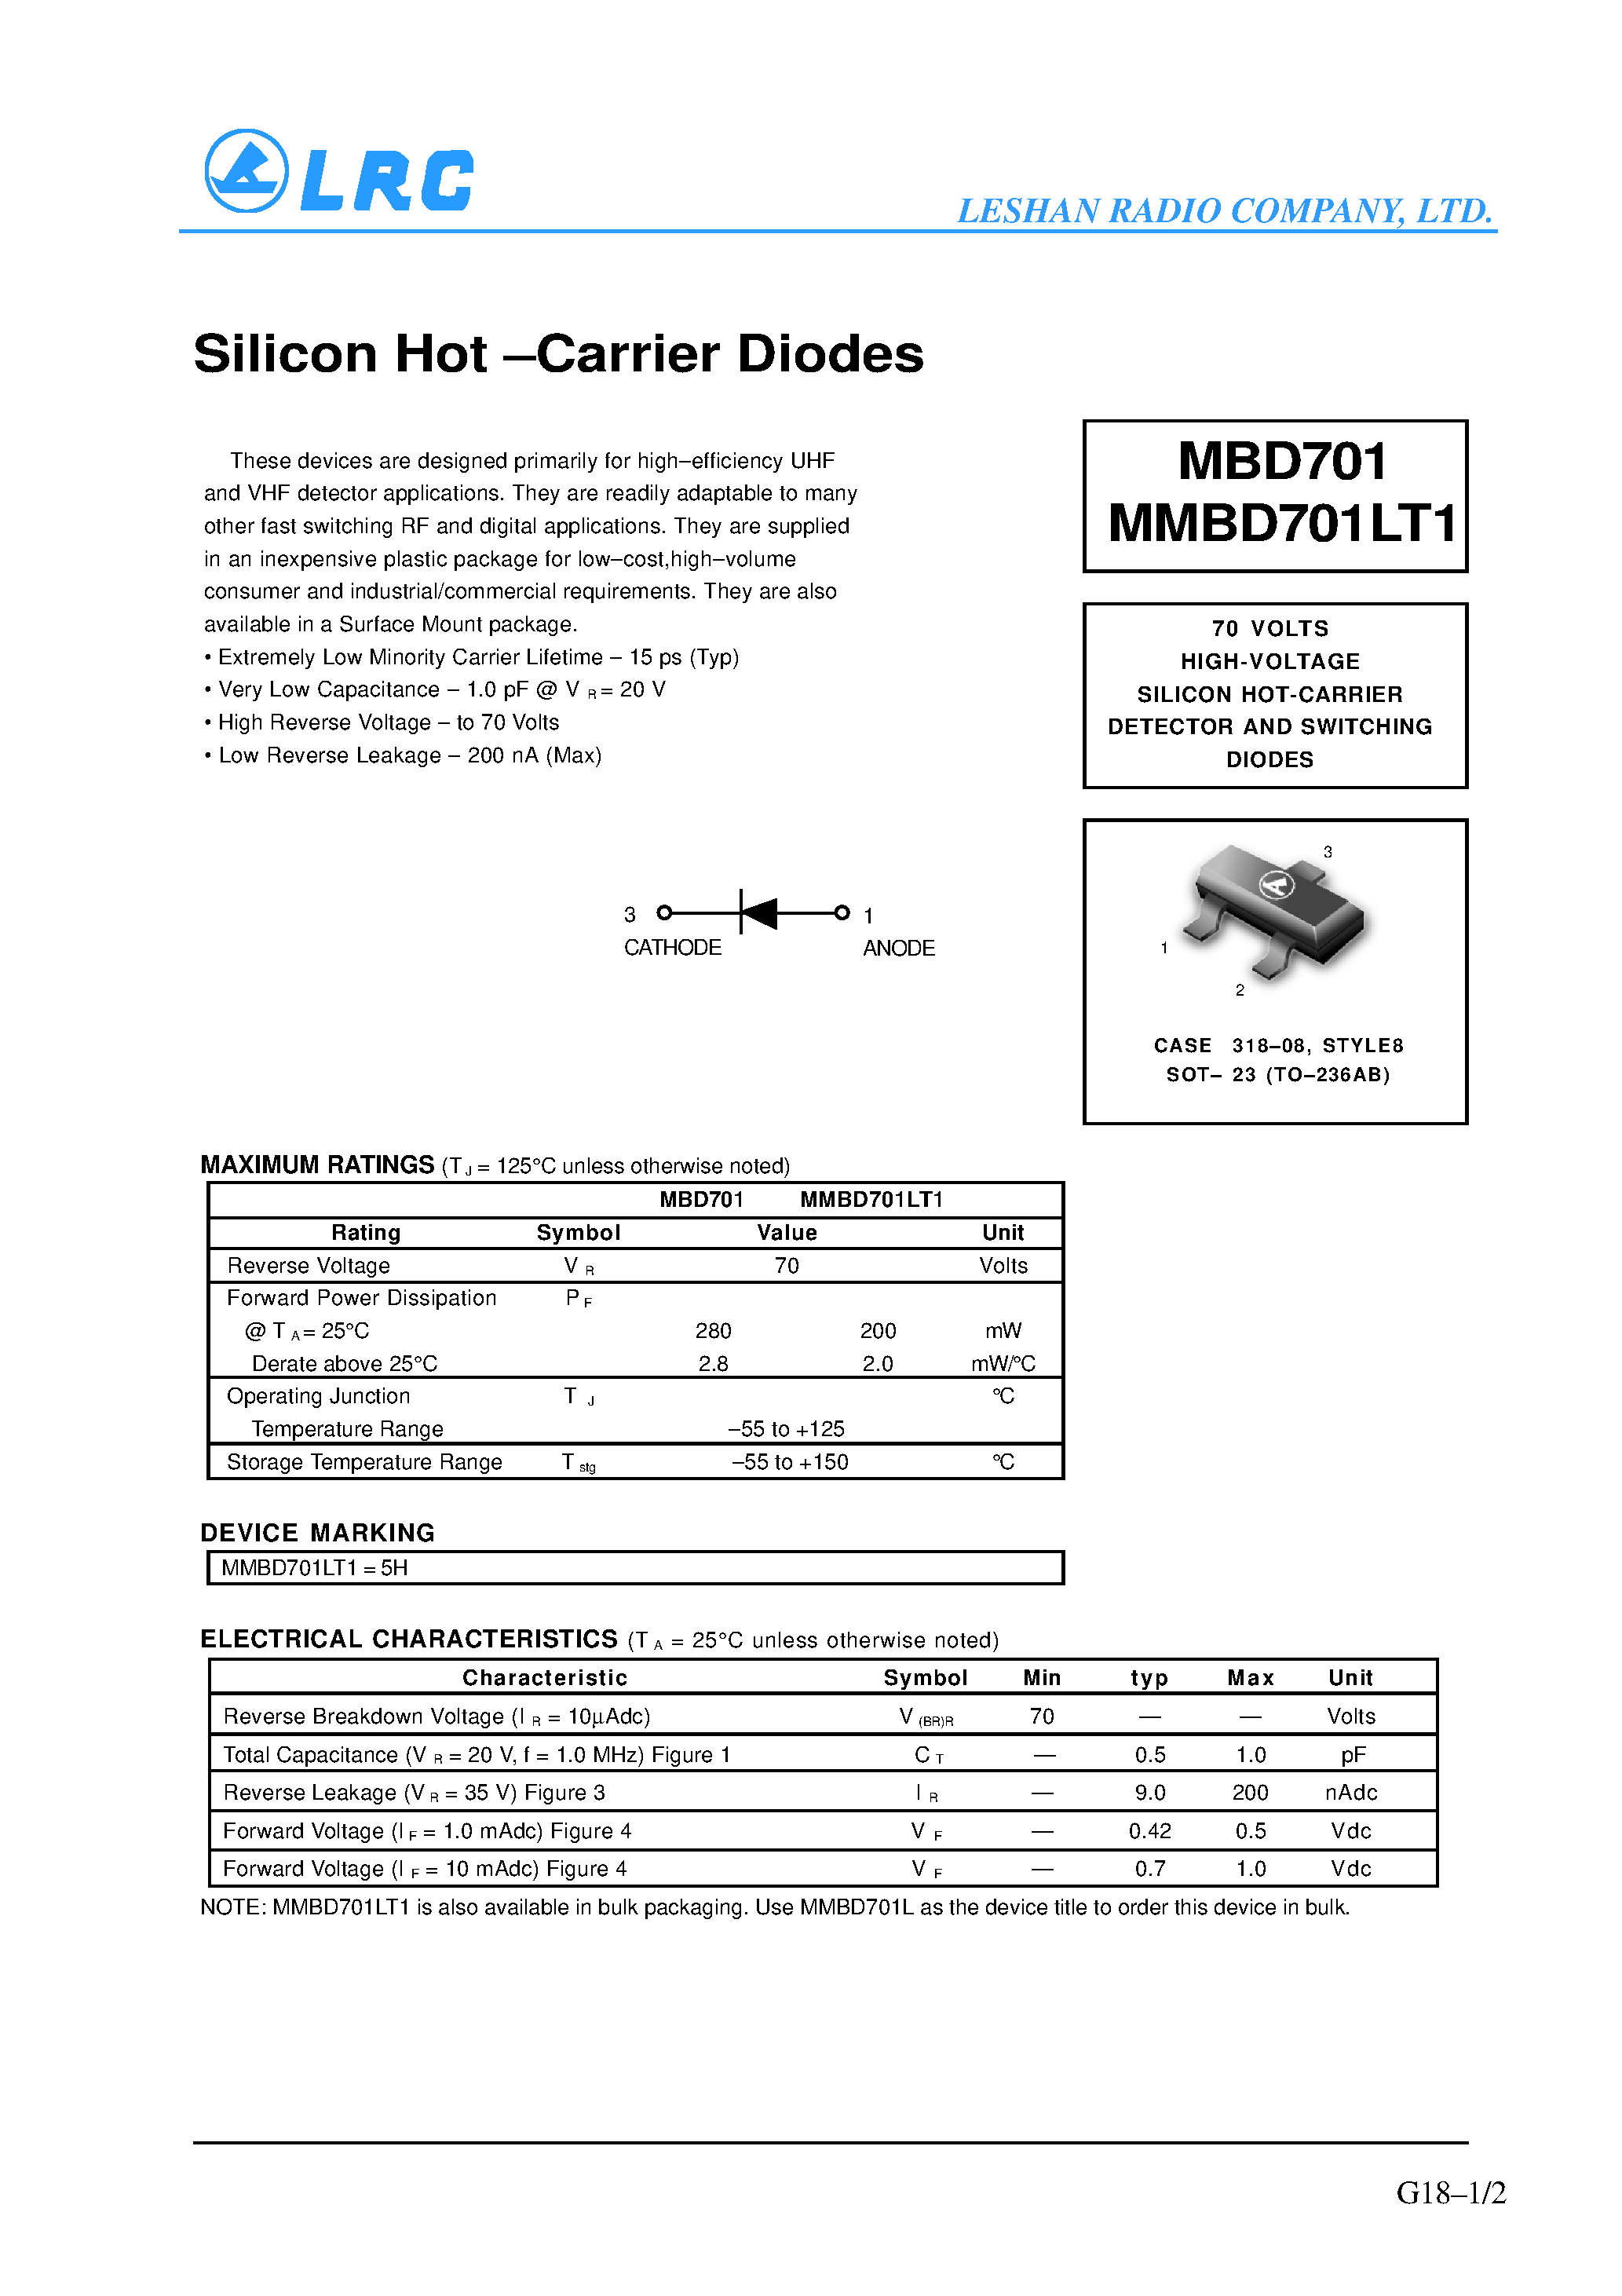 Datasheet MMBD701LT1 - Silicon Hot-Carrier Diodes page 1